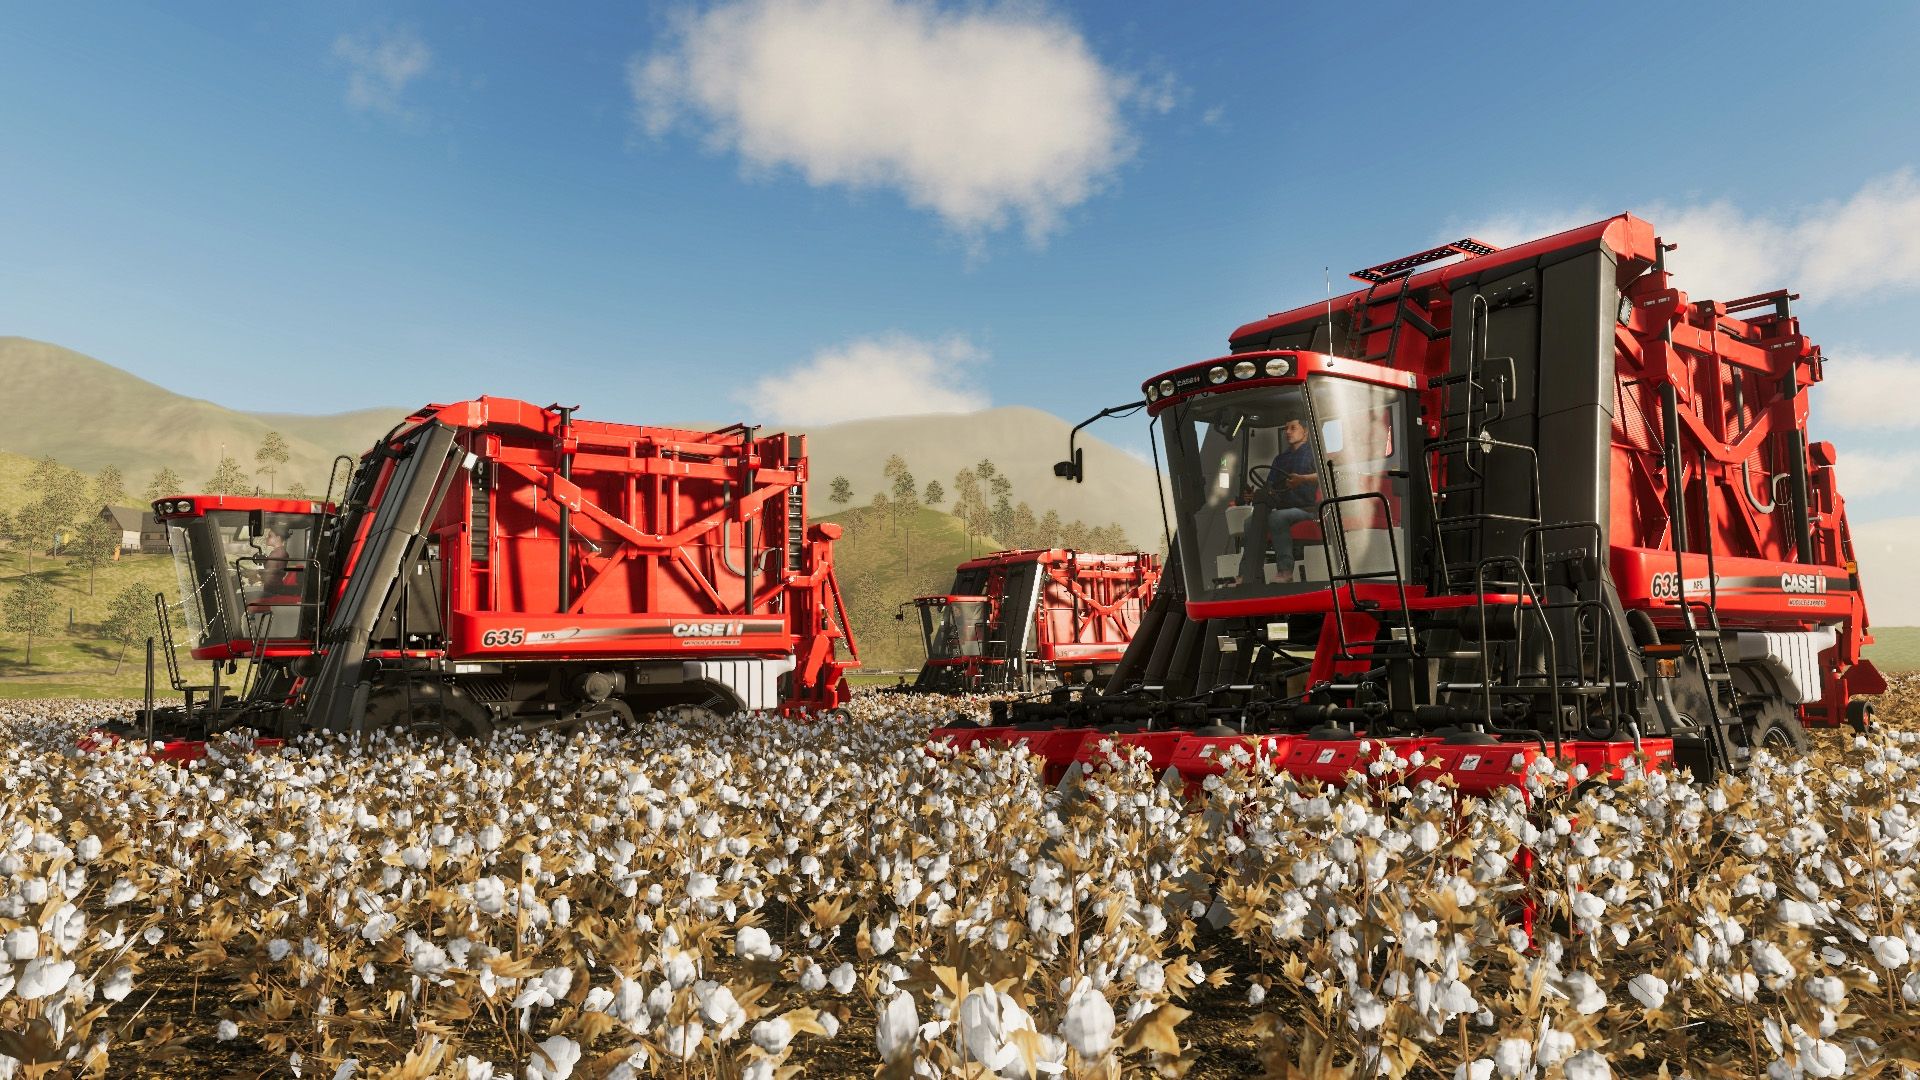 Farming Simulator 19 is free on the Epic Games Store